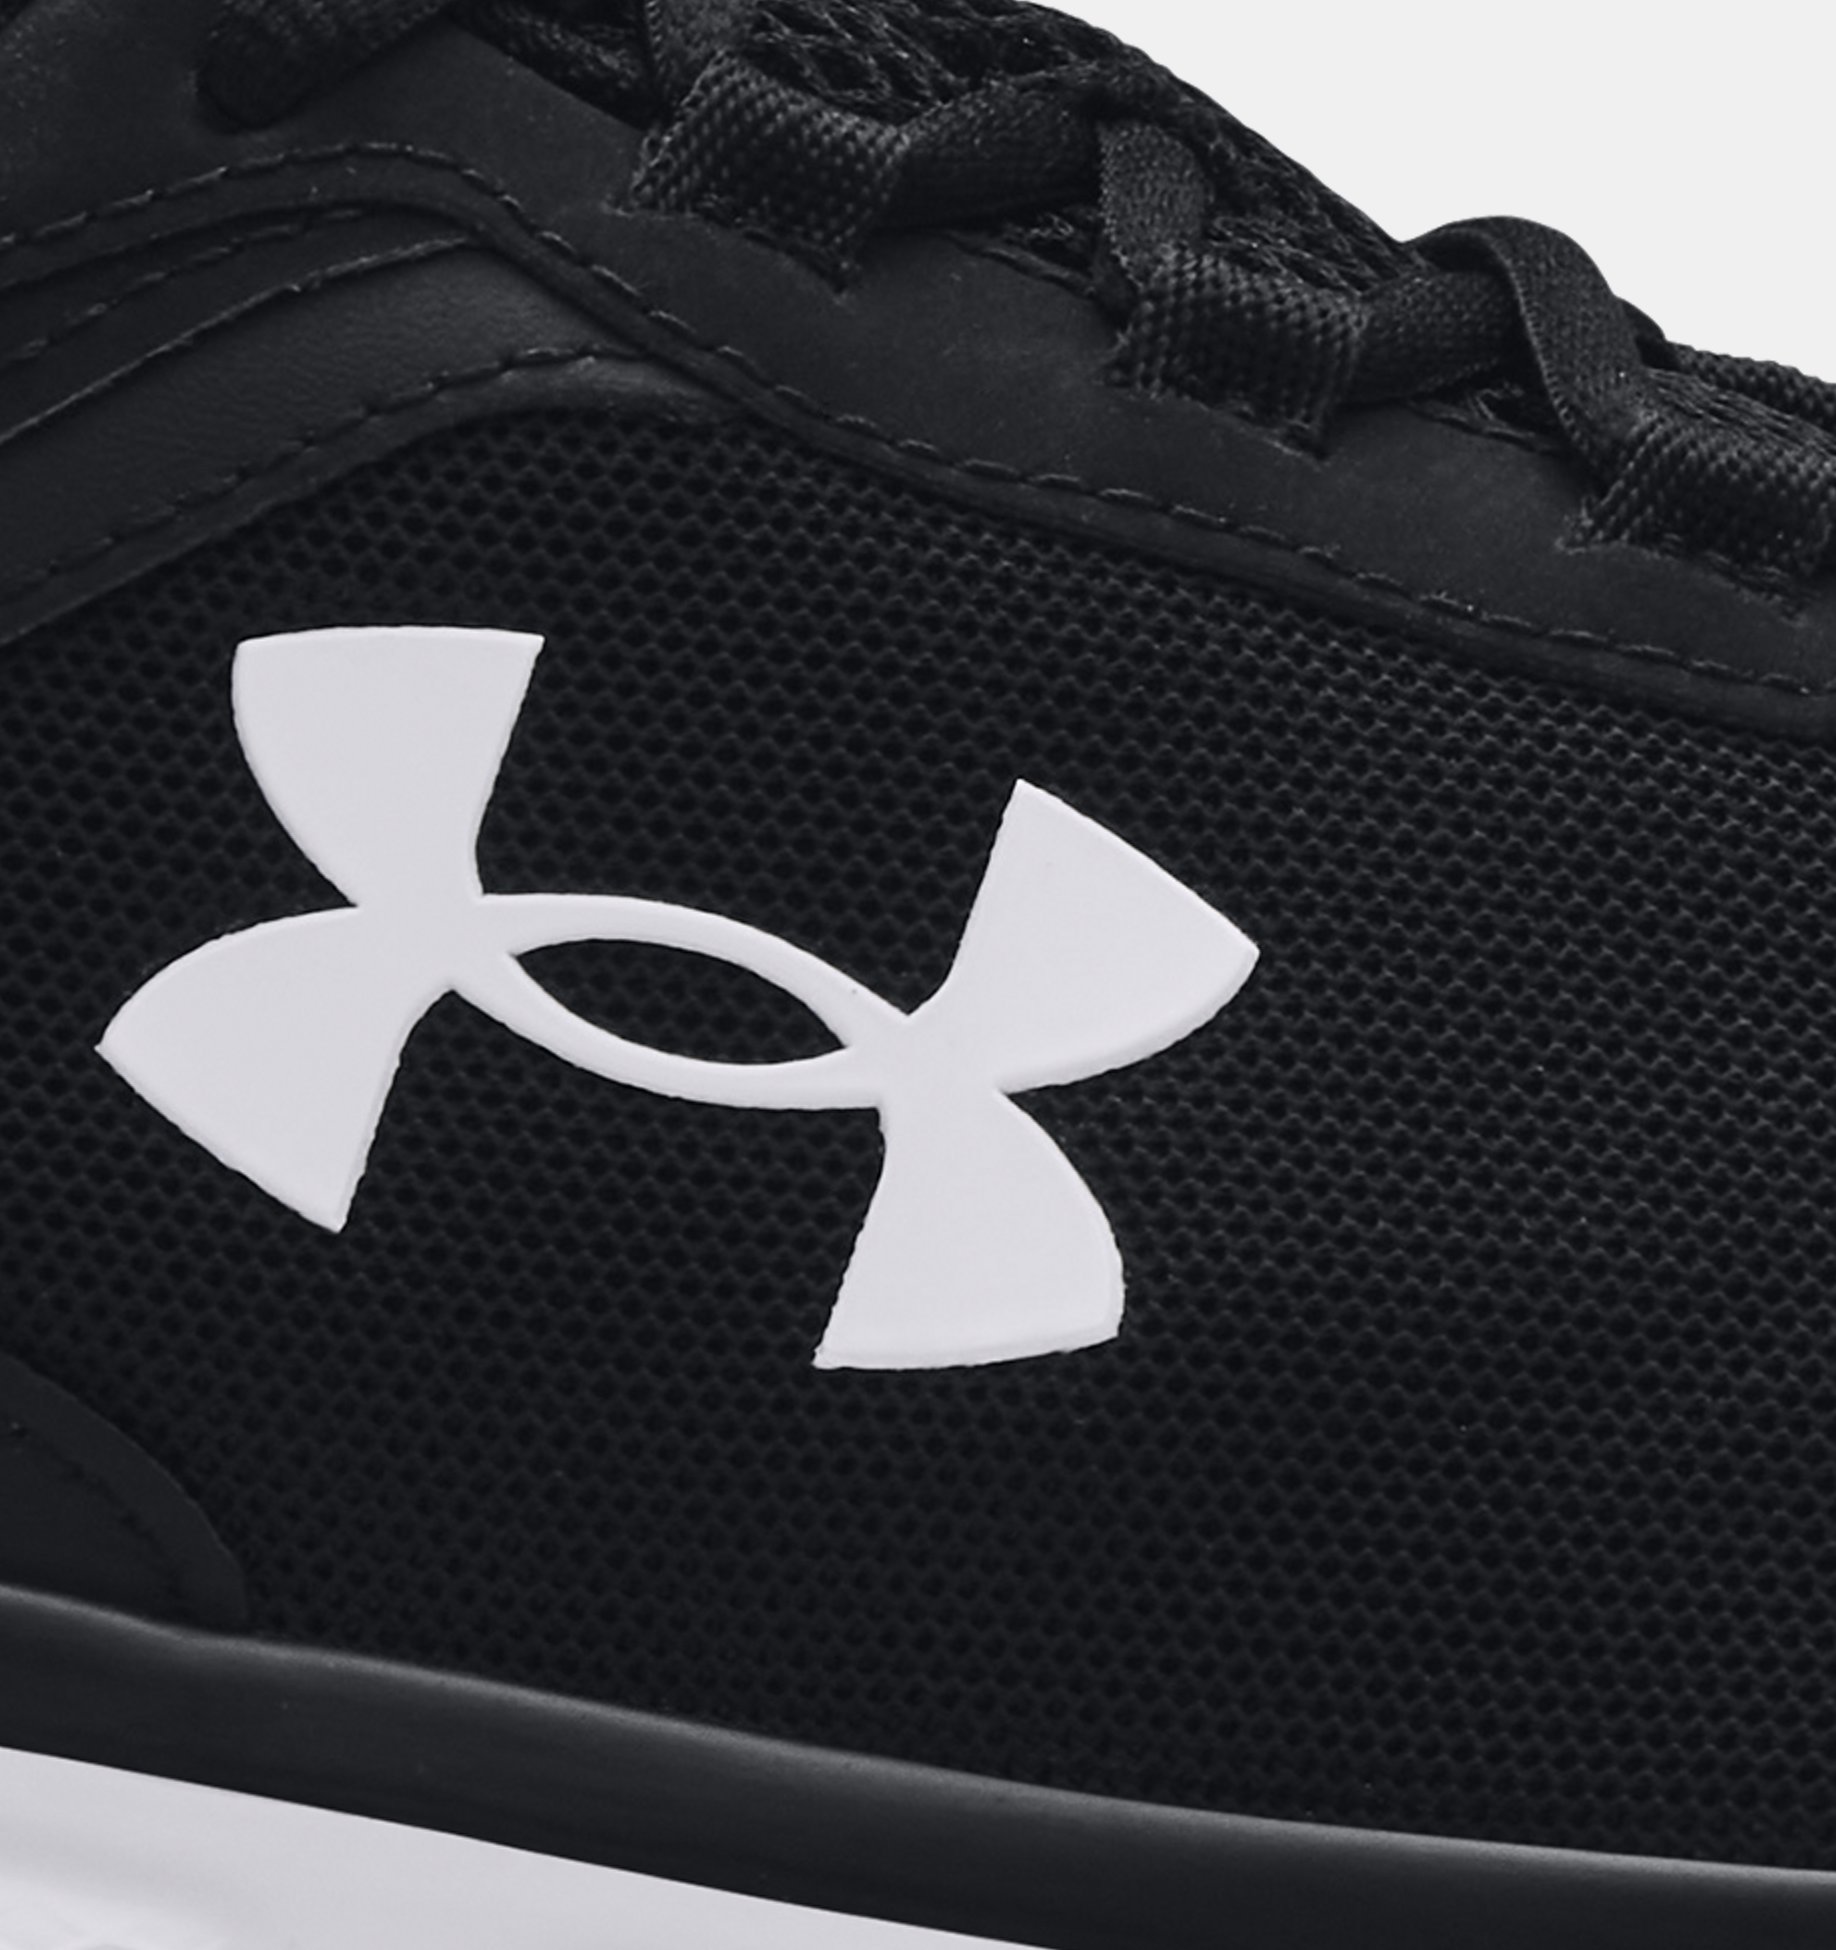 Do Under Armour Shoes Come in Wide Width?